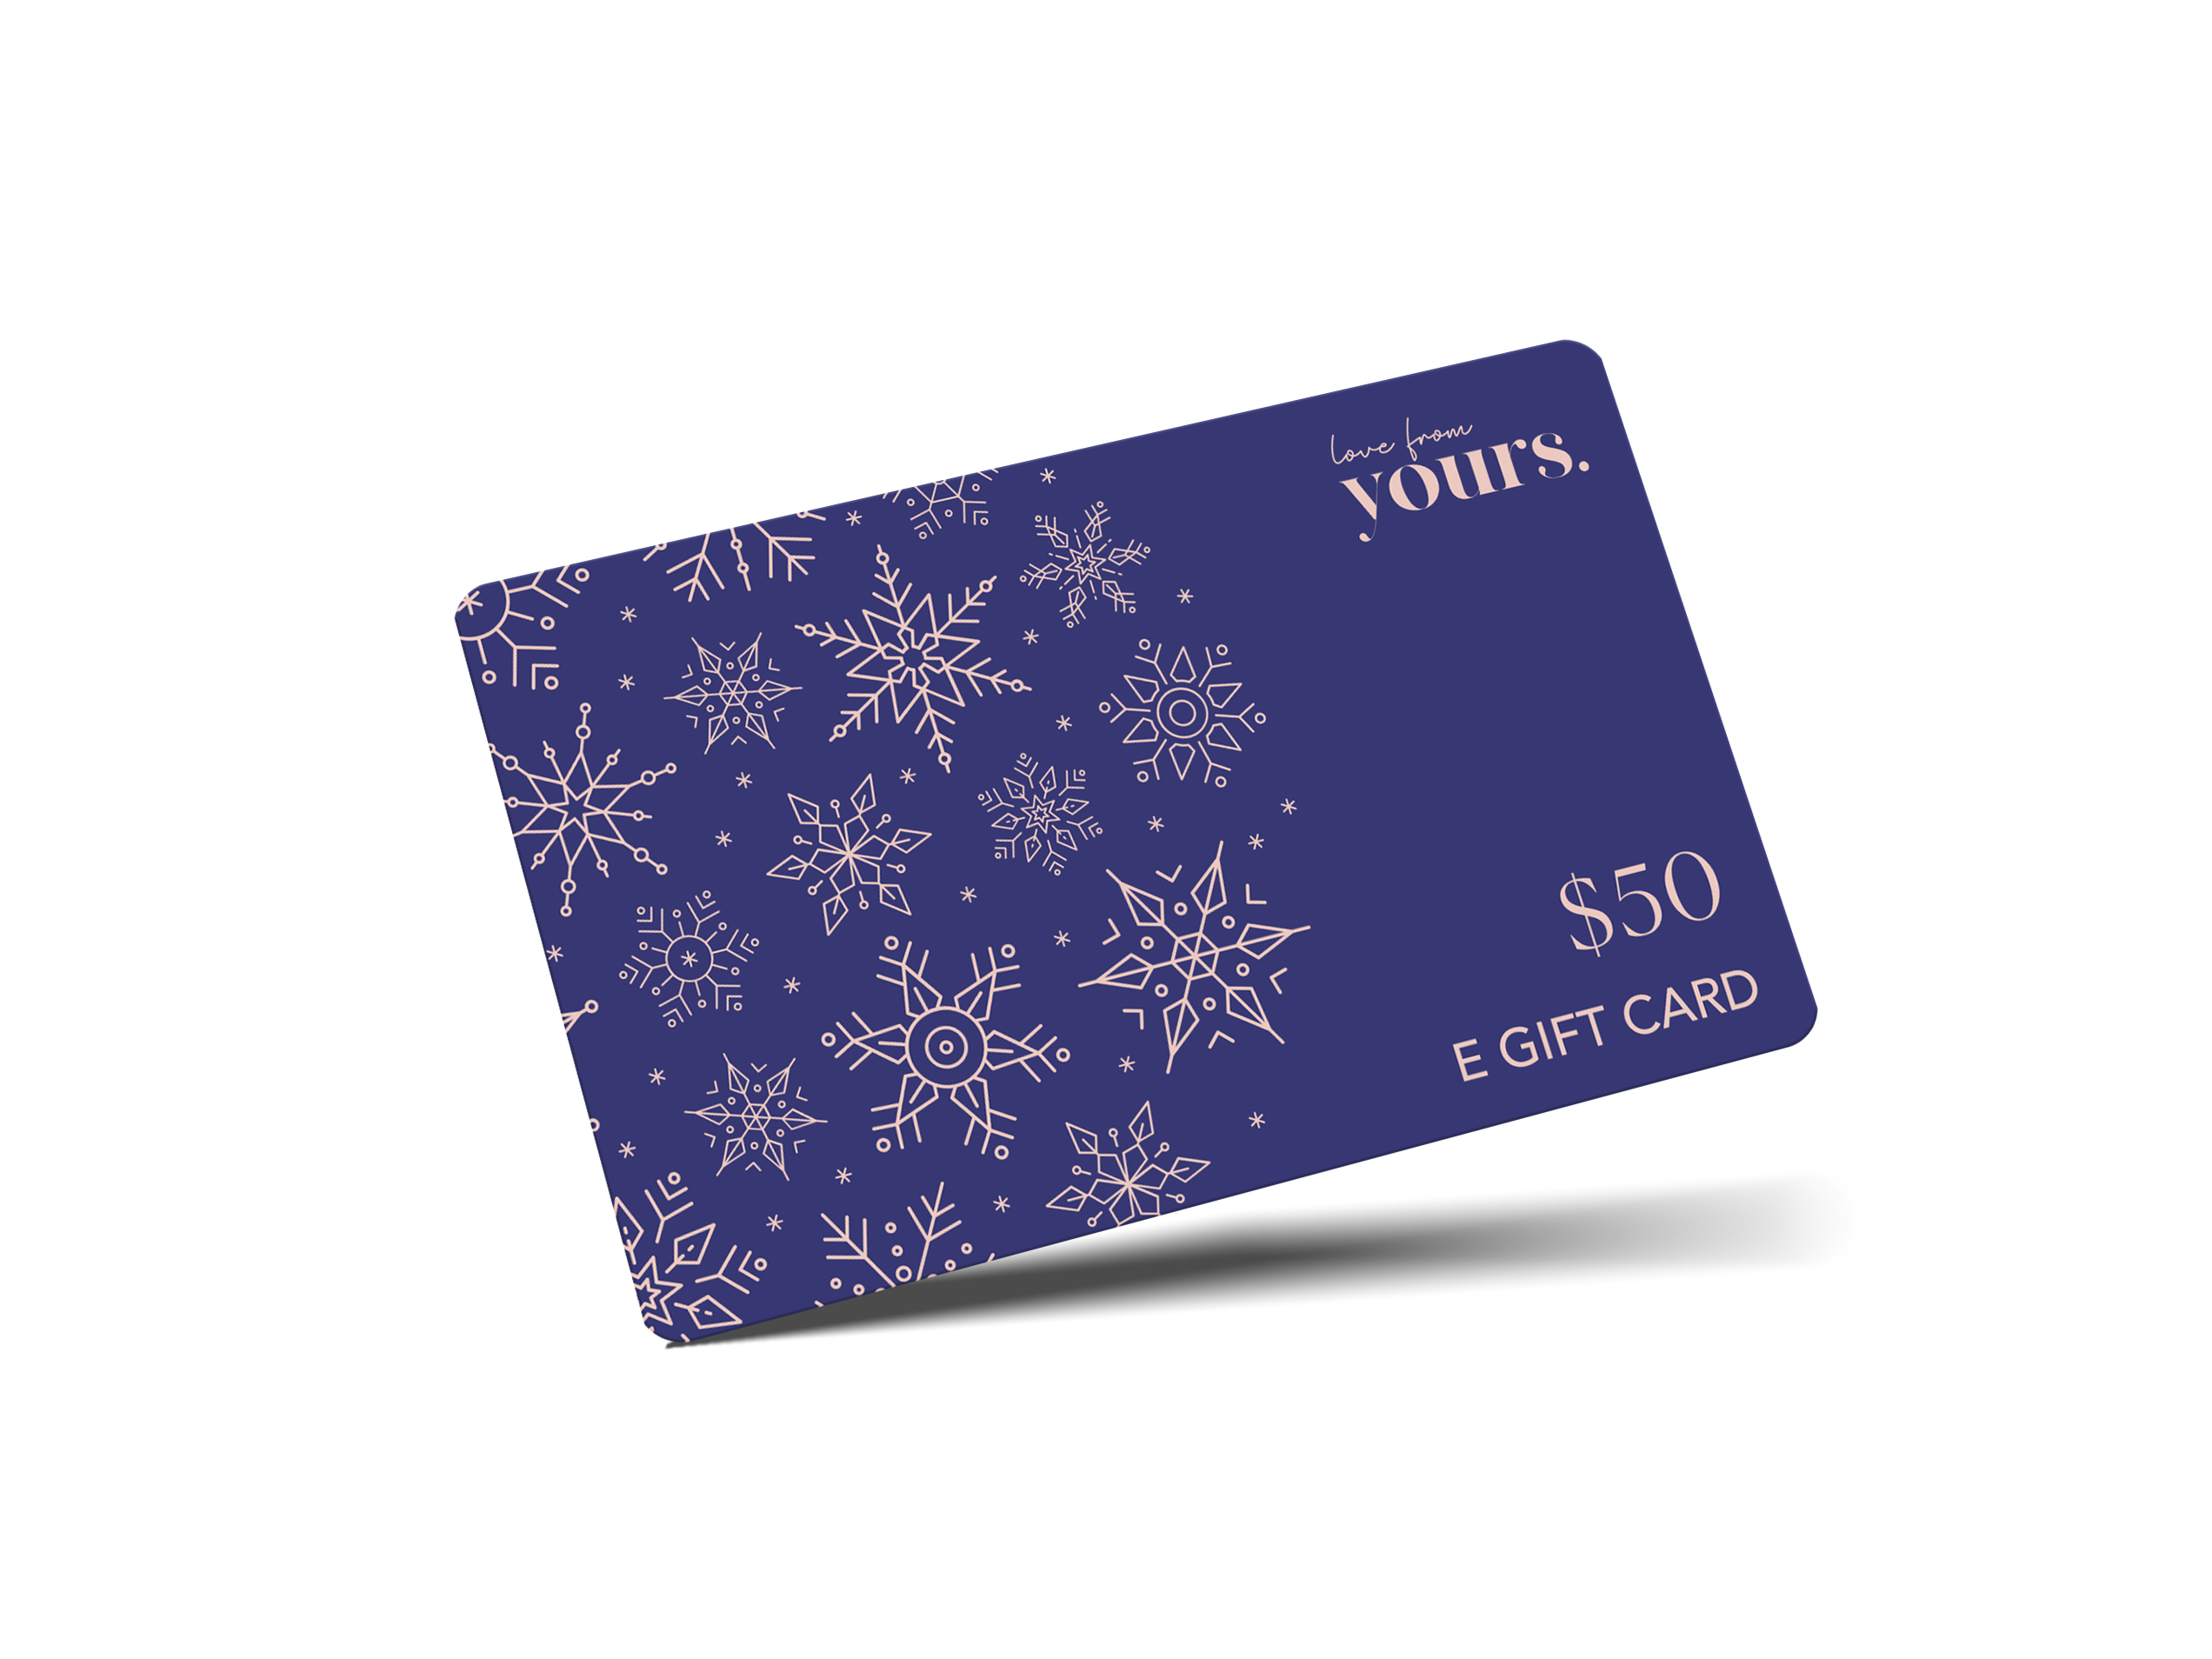 Yours E-Gift Card